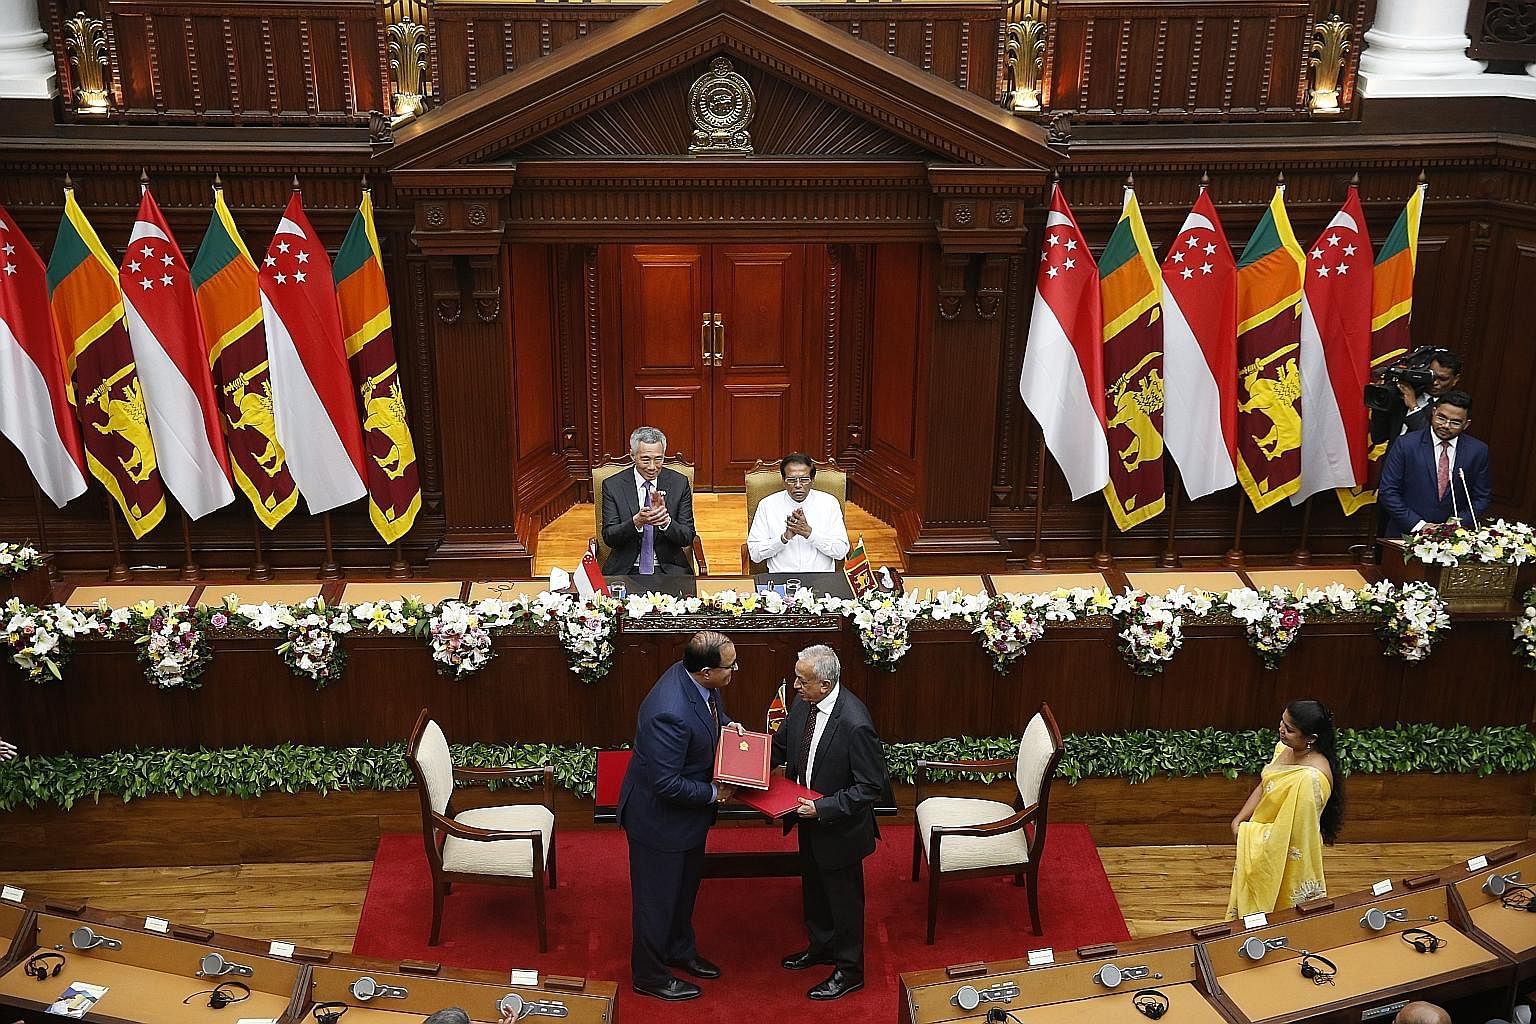 Prime Minister Lee Hsien Loong and Sri Lankan President Maithripala Sirisena witnessing the signing of the FTA yesterday between Minister of Trade and Industry (Industry) S. Iswaran and Sri Lankan Minister for Development Strategies and International